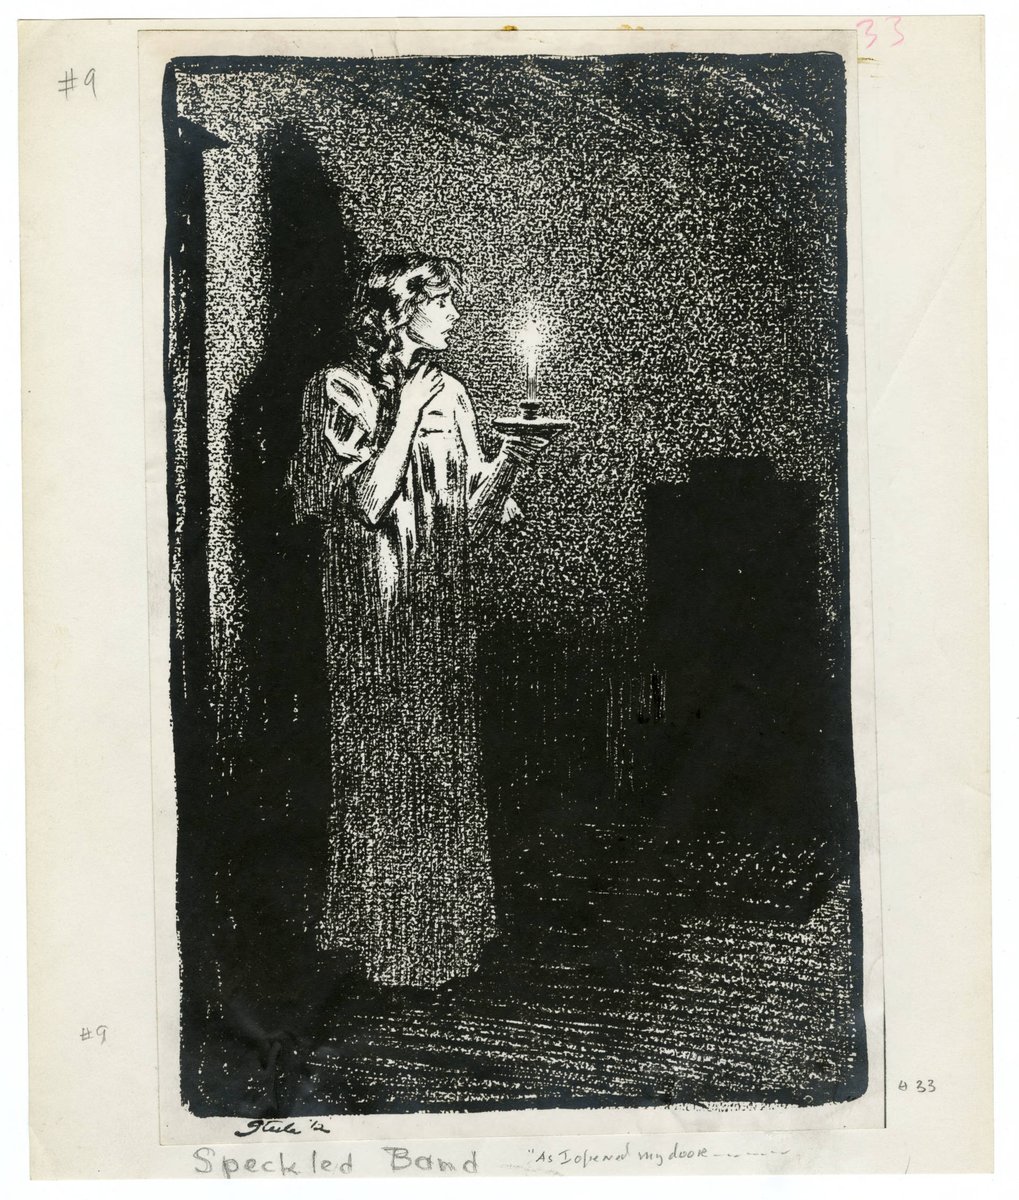 Time for some light in dark places. This 1912 Steele illustration was made for "The Speckled Band" and still causes us  @SherlockUMN  @umnlib a catch in our breath. For many this is their favorite Holmes adventure. Light a candle as you can. Be safe & well.  http://purl.umn.edu/99157 